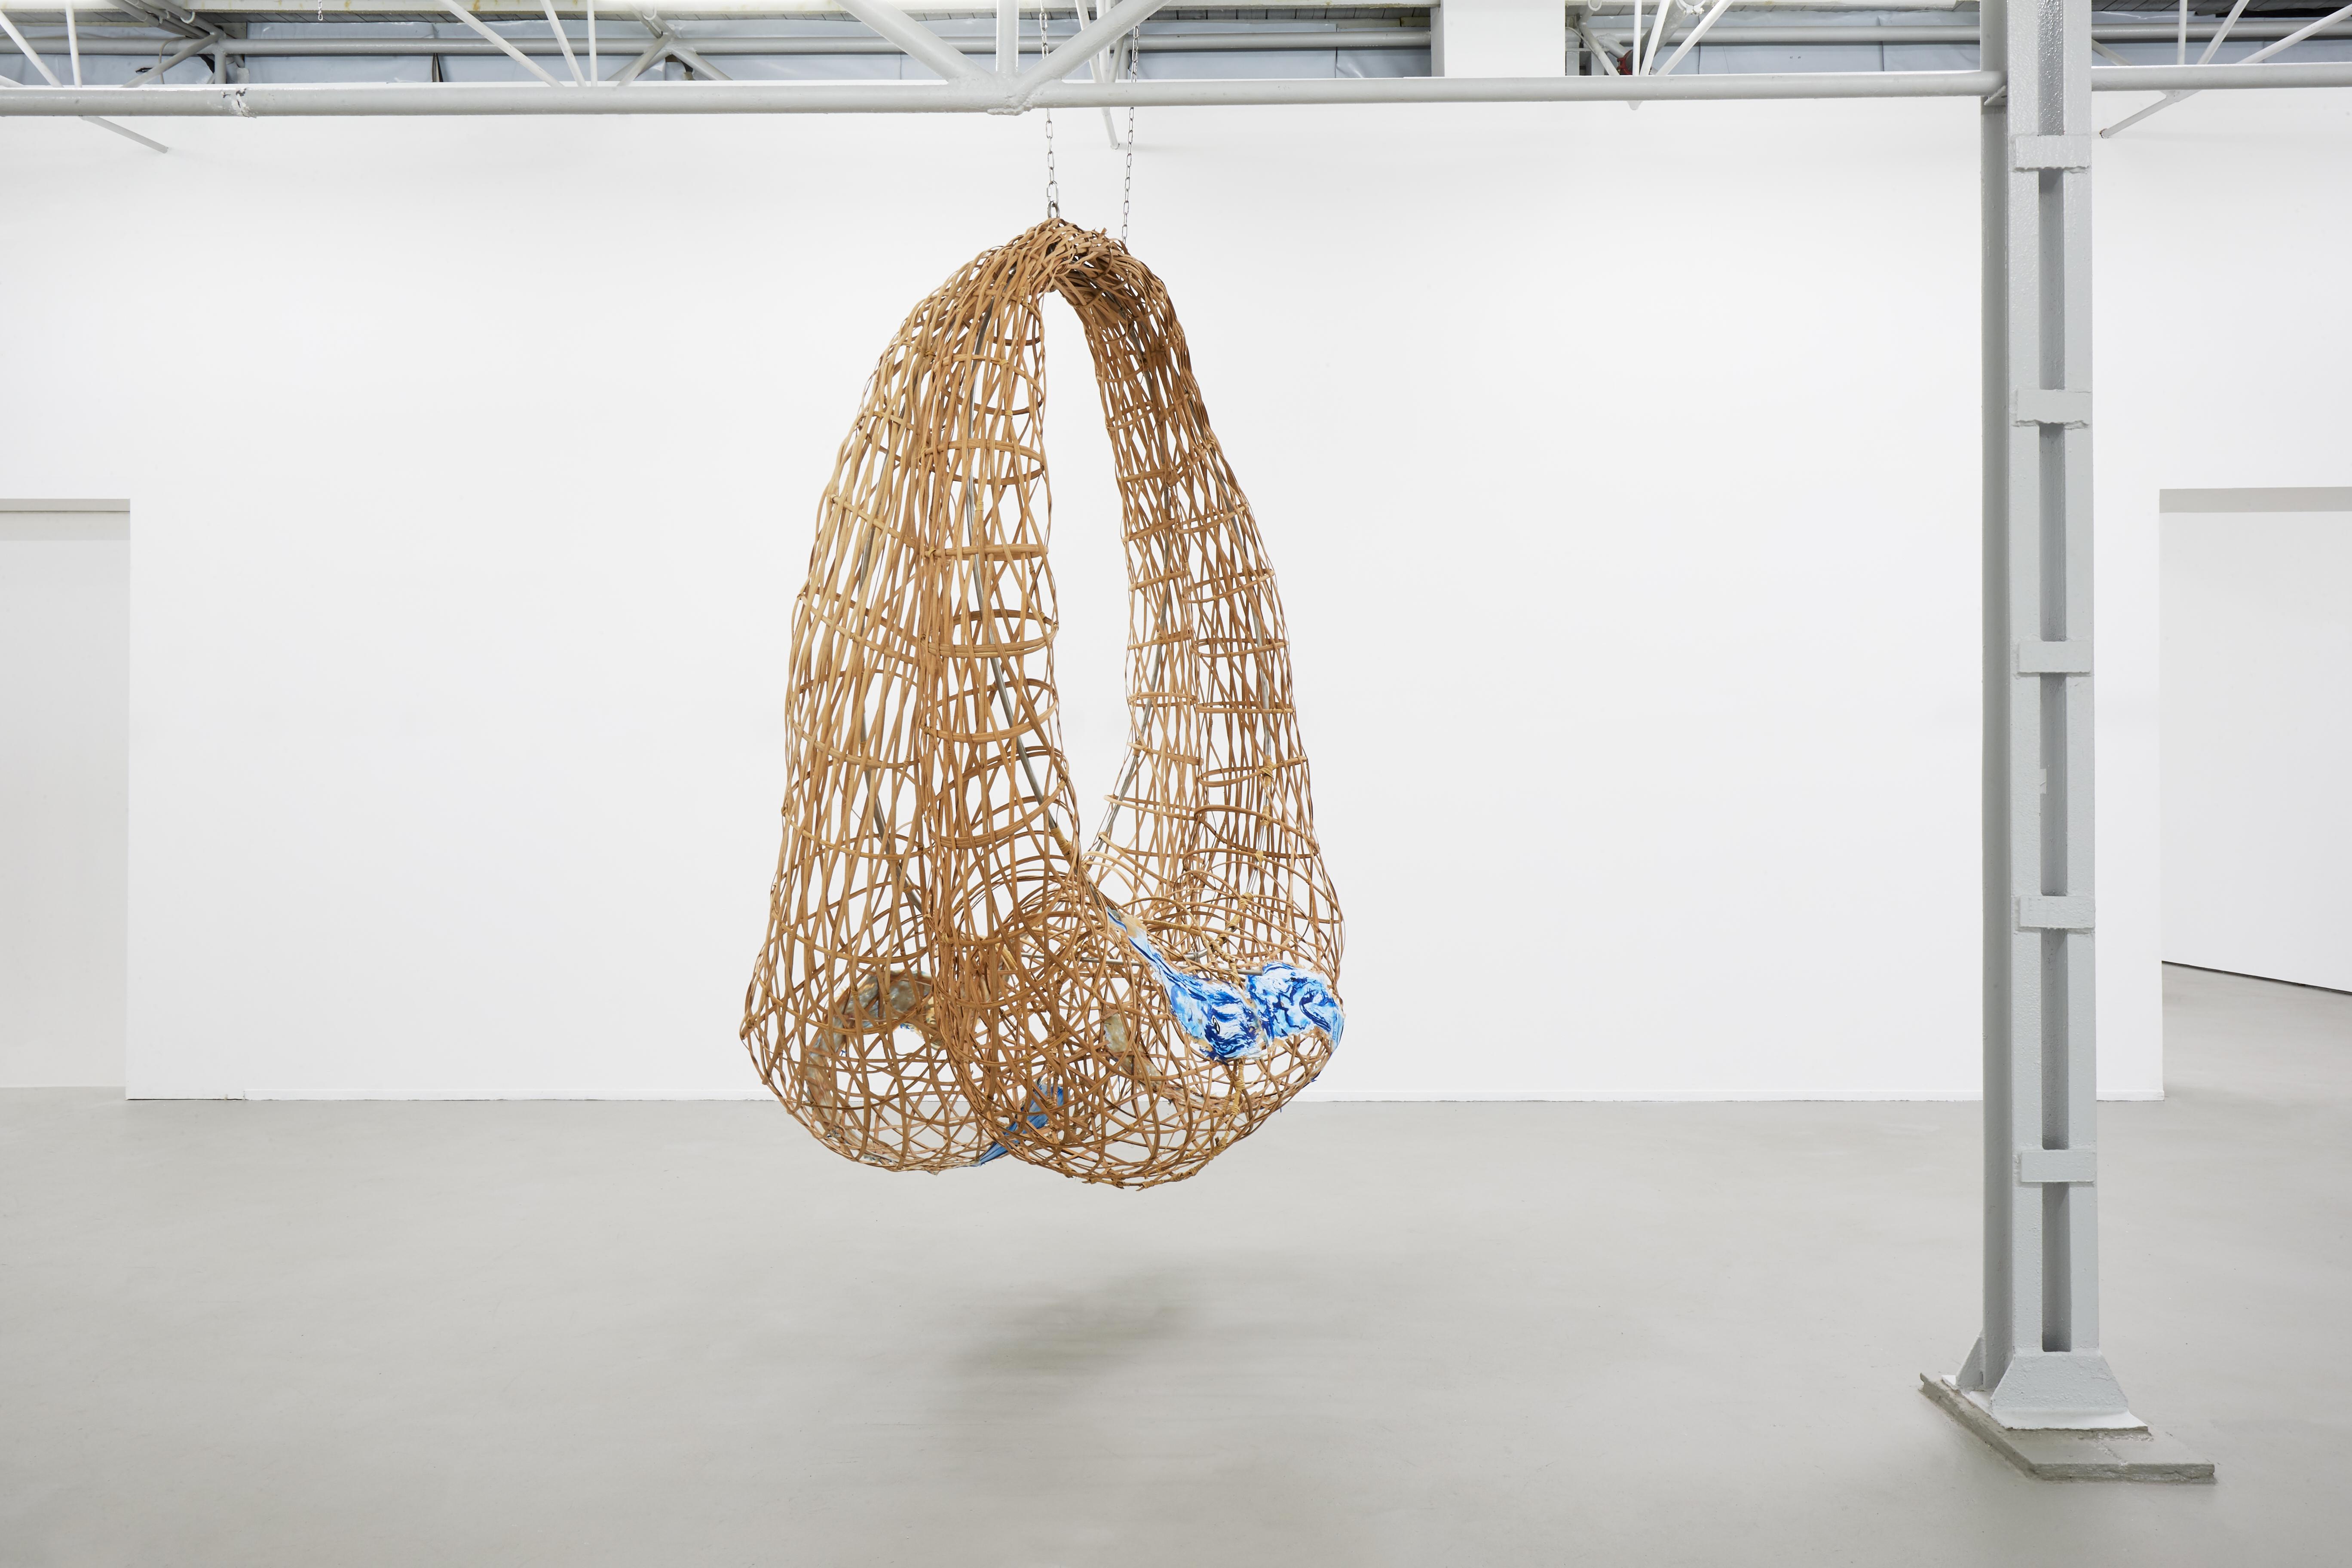 Damien & The Love Guru & Christiane Blattmann They Have Broken with the Tradition of Inside and Outside 2019 rattan, steel, silicone, pigment 200 x 180 x 80 cm. Une oeuvre exposée lors de l'expo Sculpture Factory.